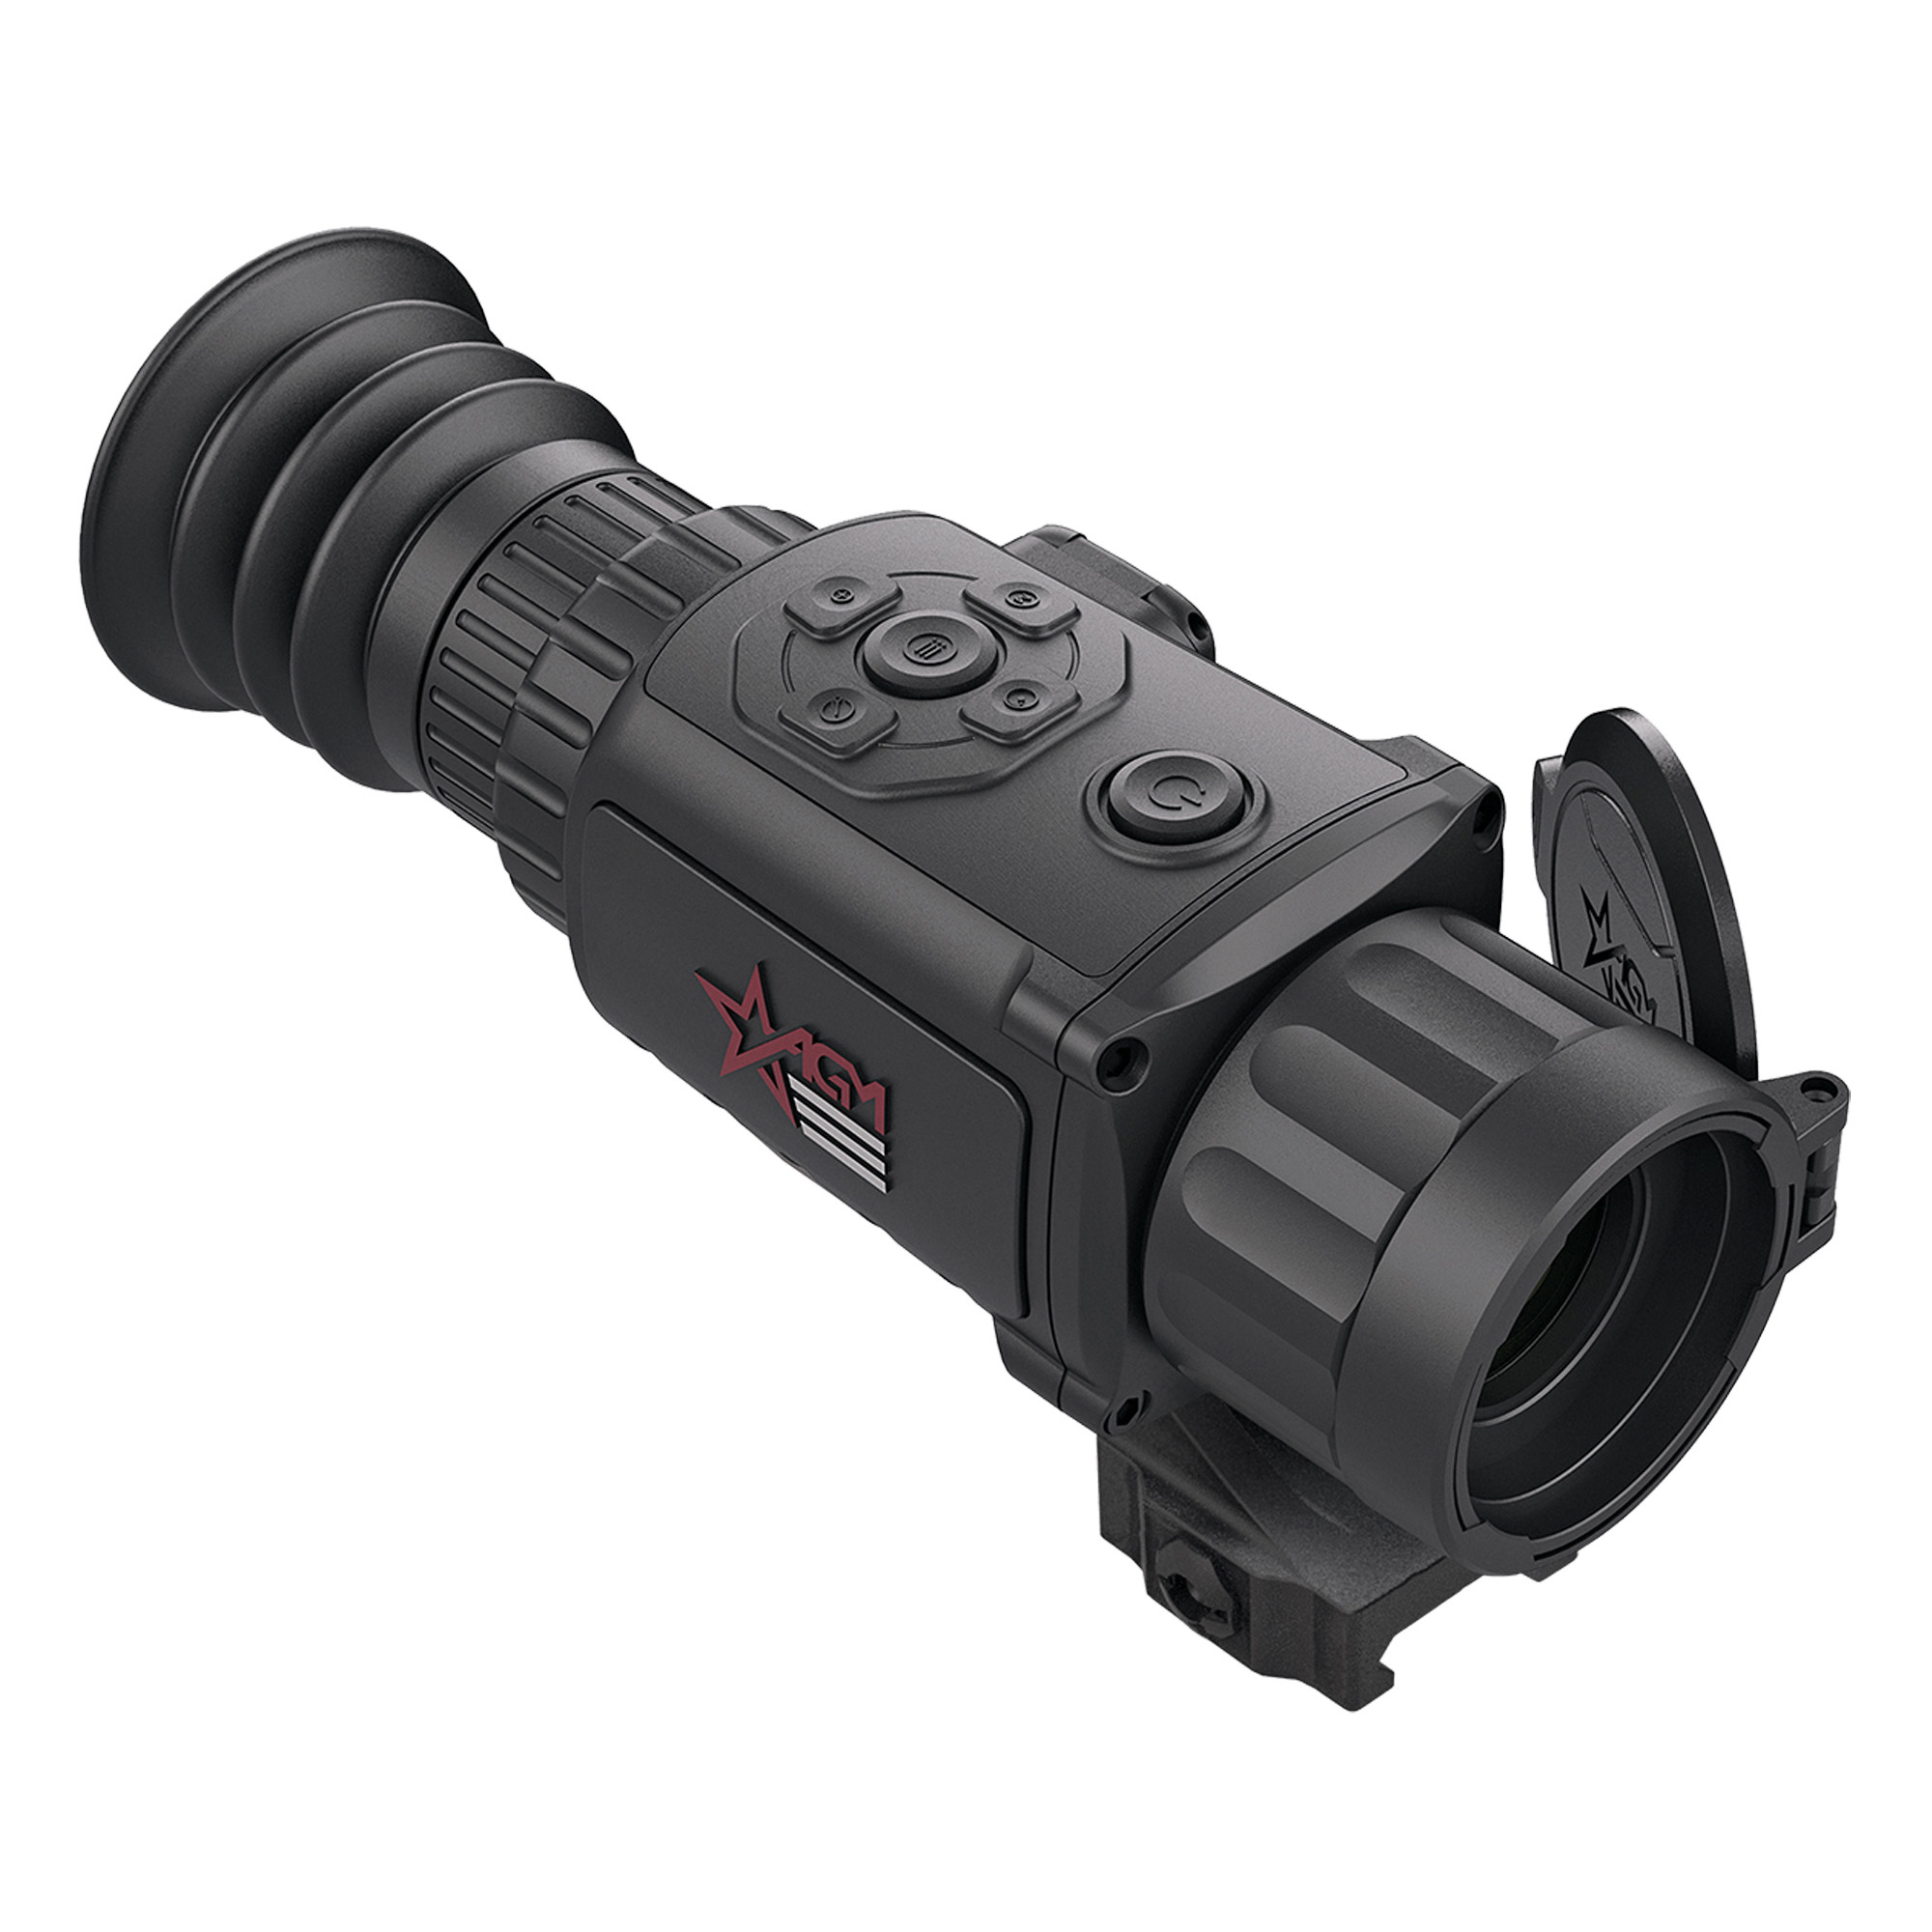 AGM RATTLER TS35-640 THERMAL SCOPE